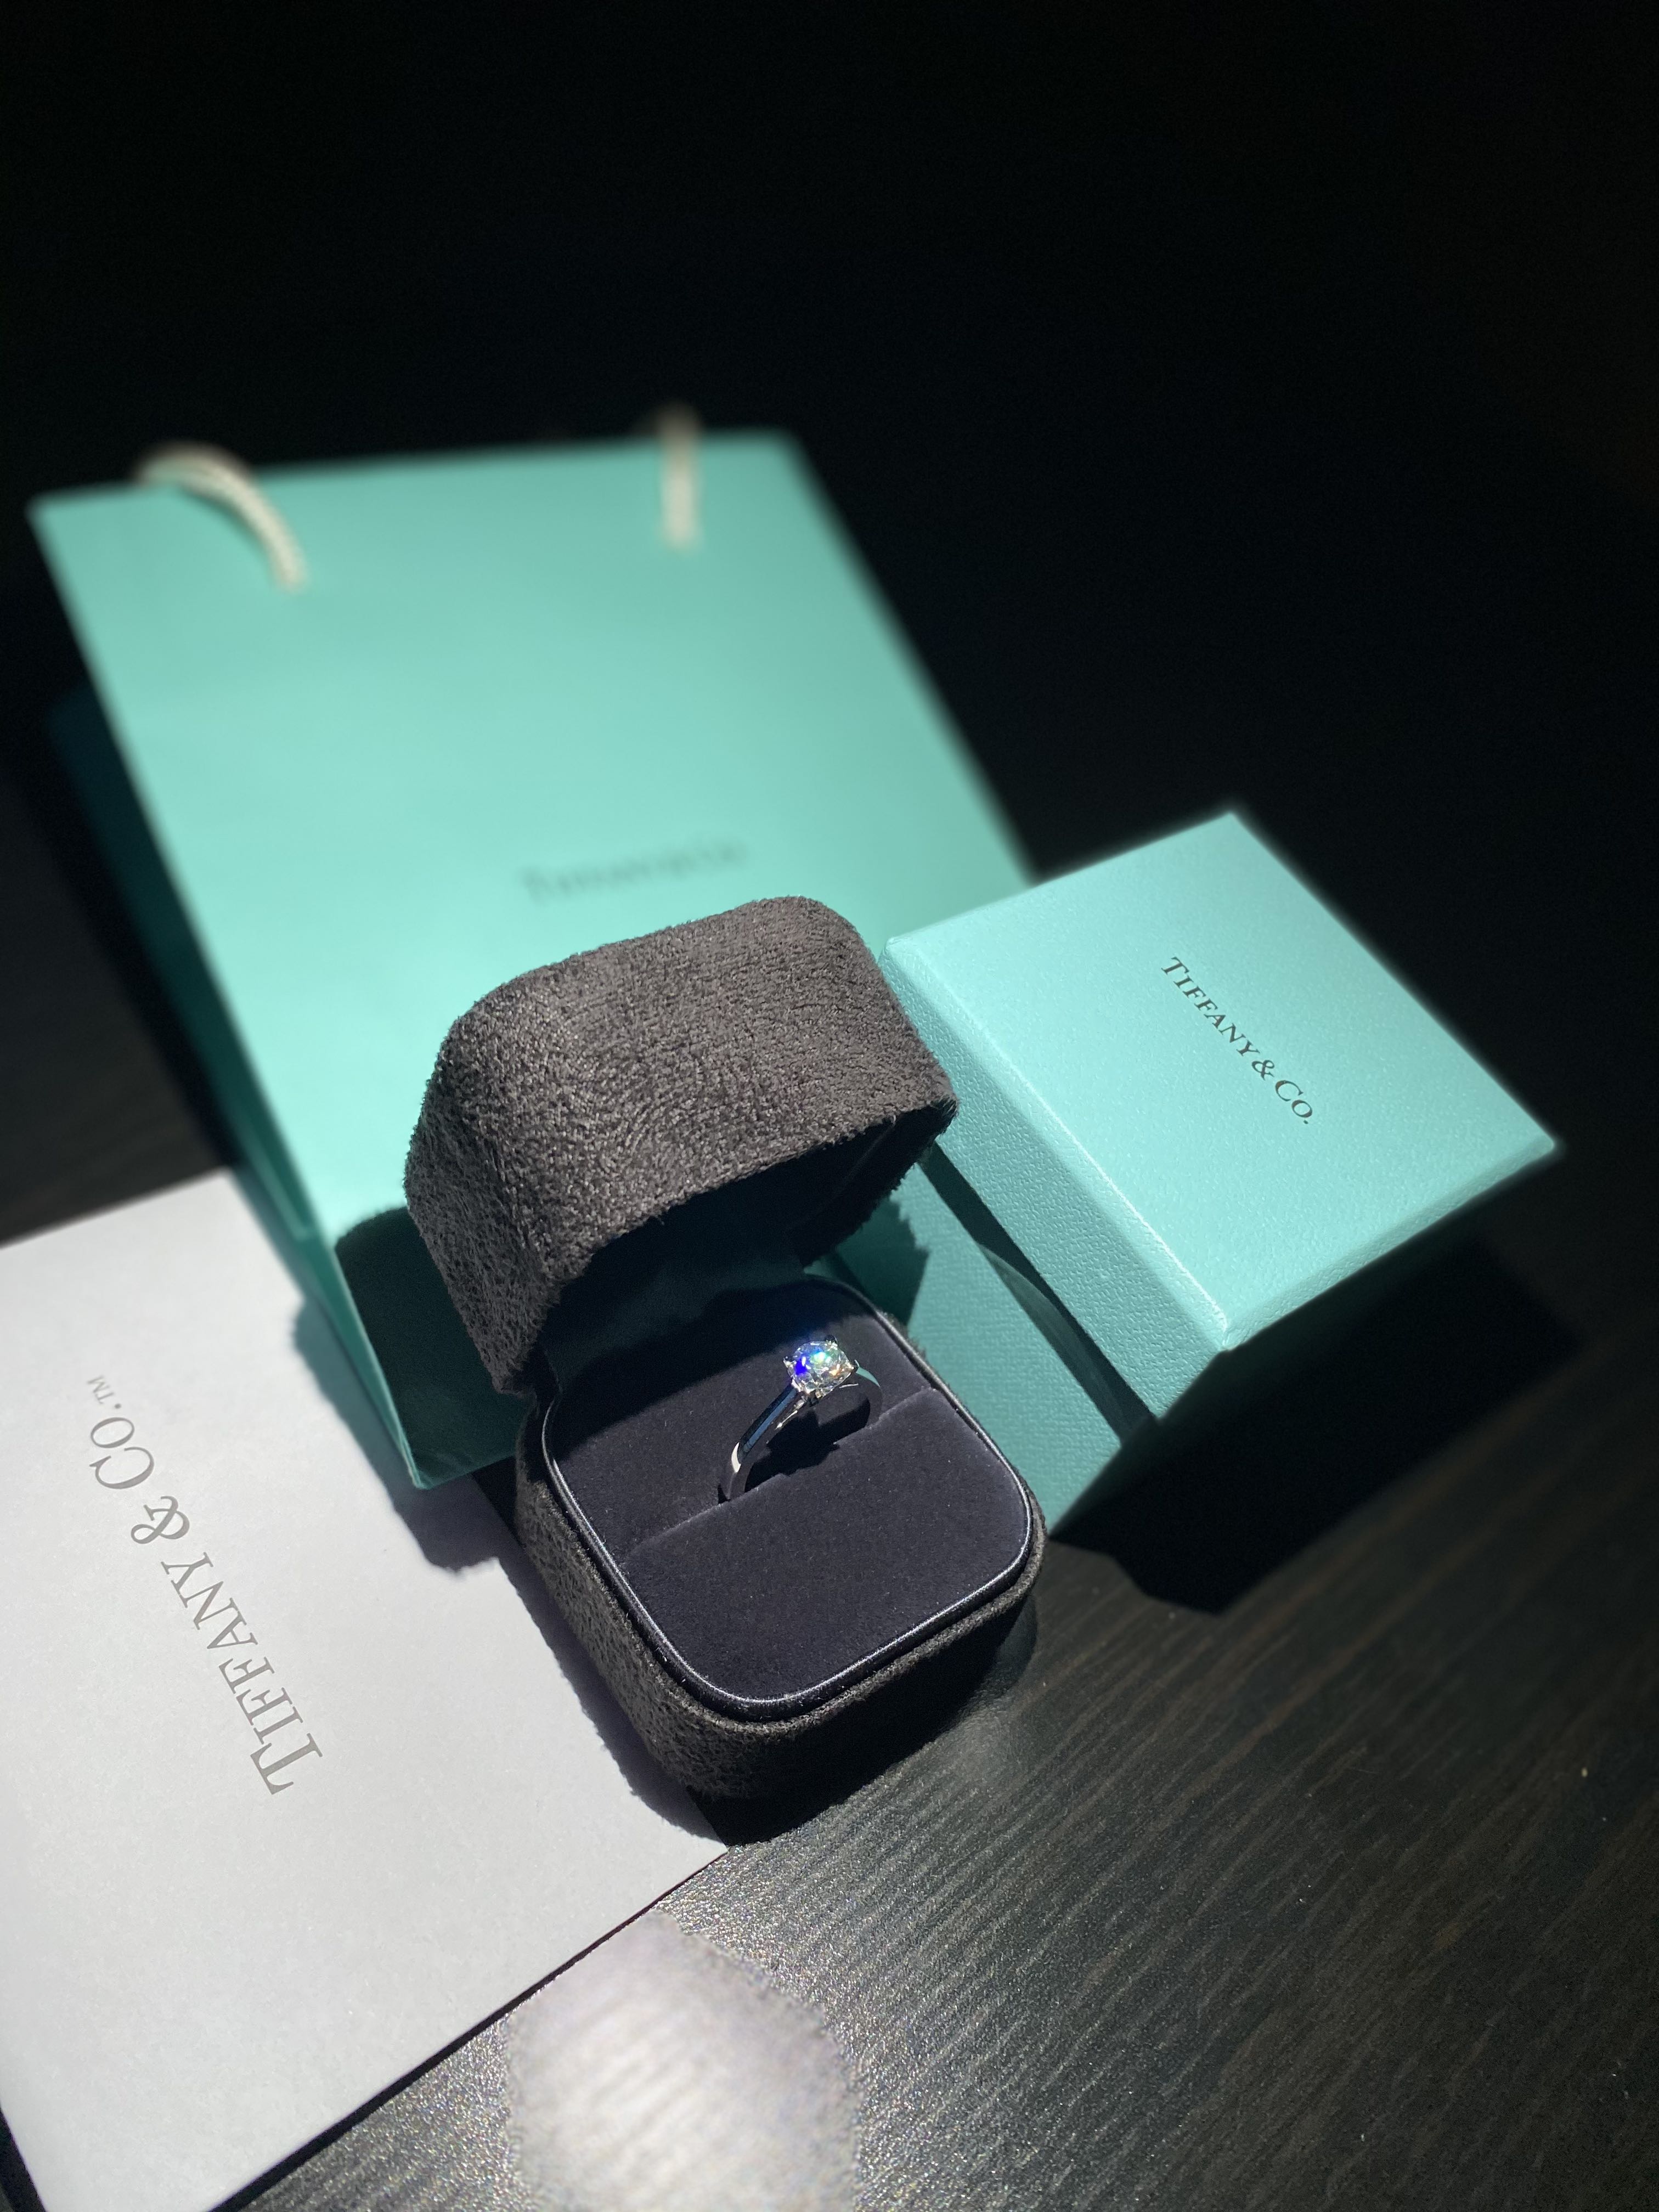 tiffany & co phone number